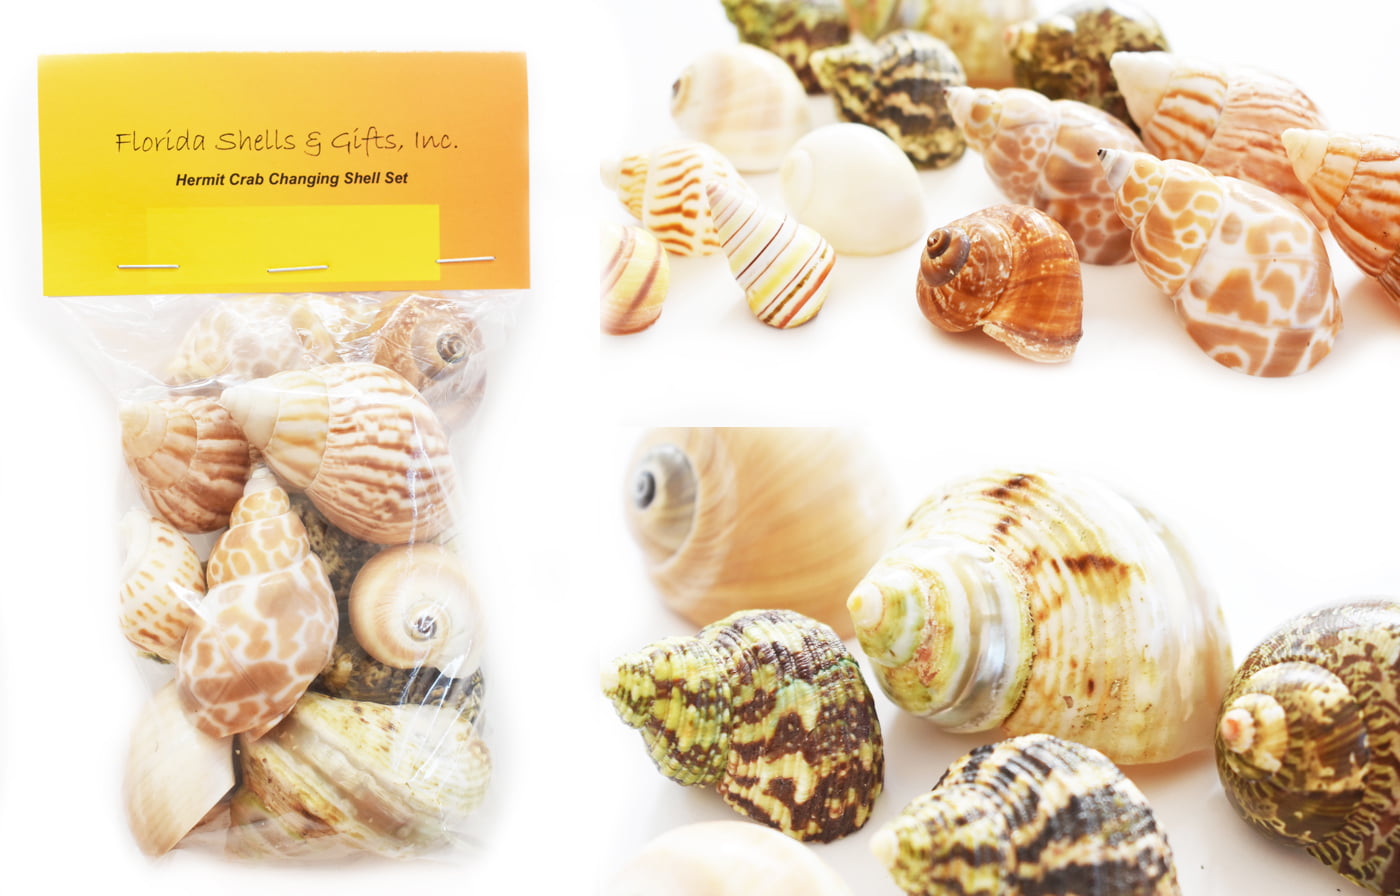 FSG Opening Size 3/8-1 1/4 Select 15 Hermit Crab Shells Assorted Changing Seashells Small 3/4-2 Size Beautiful 